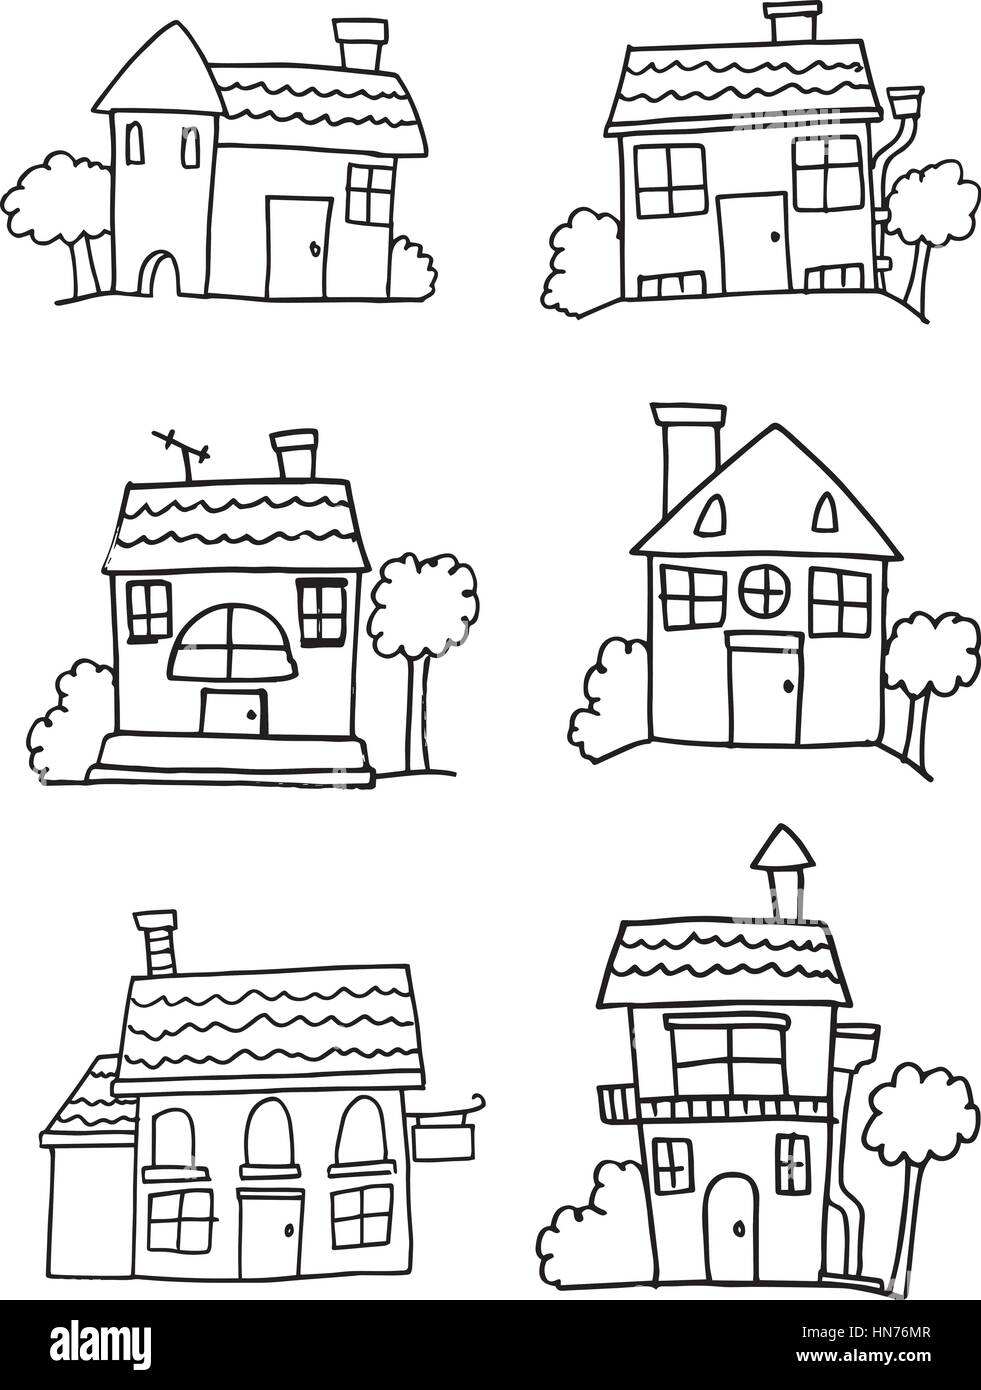 Household Home Objects Collection Hand Drawing Stock Vector (Royalty Free)  131075837, Shutterstock